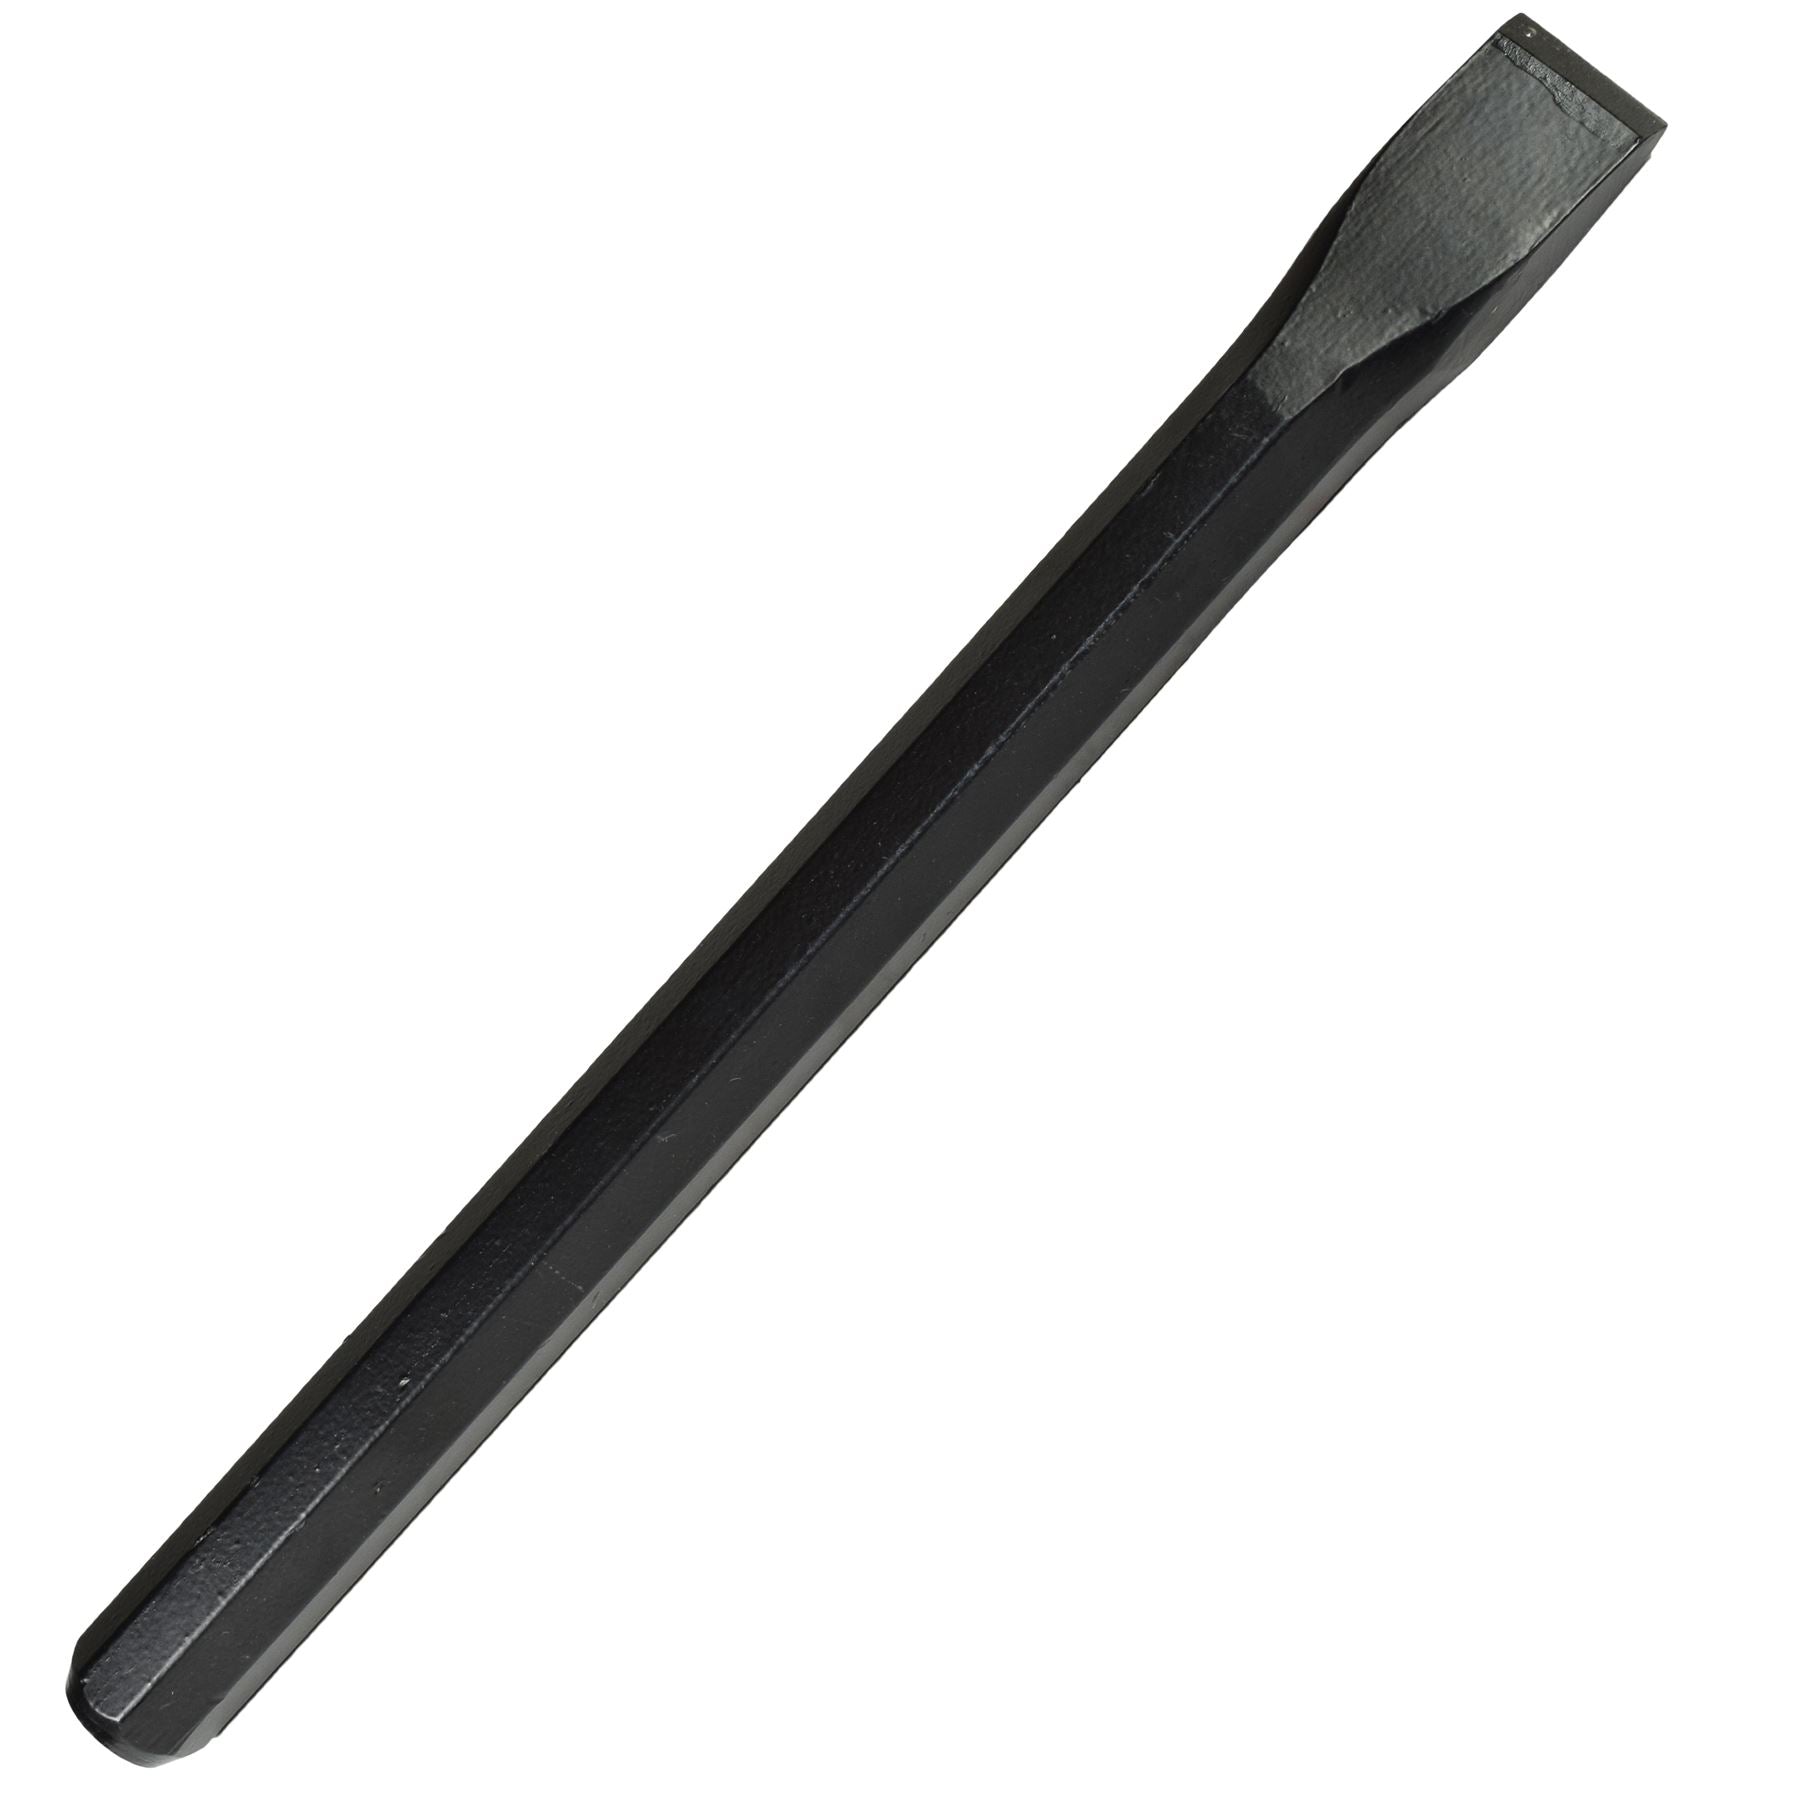 Constant Black Profile Cold Chisel For Brick Stone Block Steel 300mm x 25mm